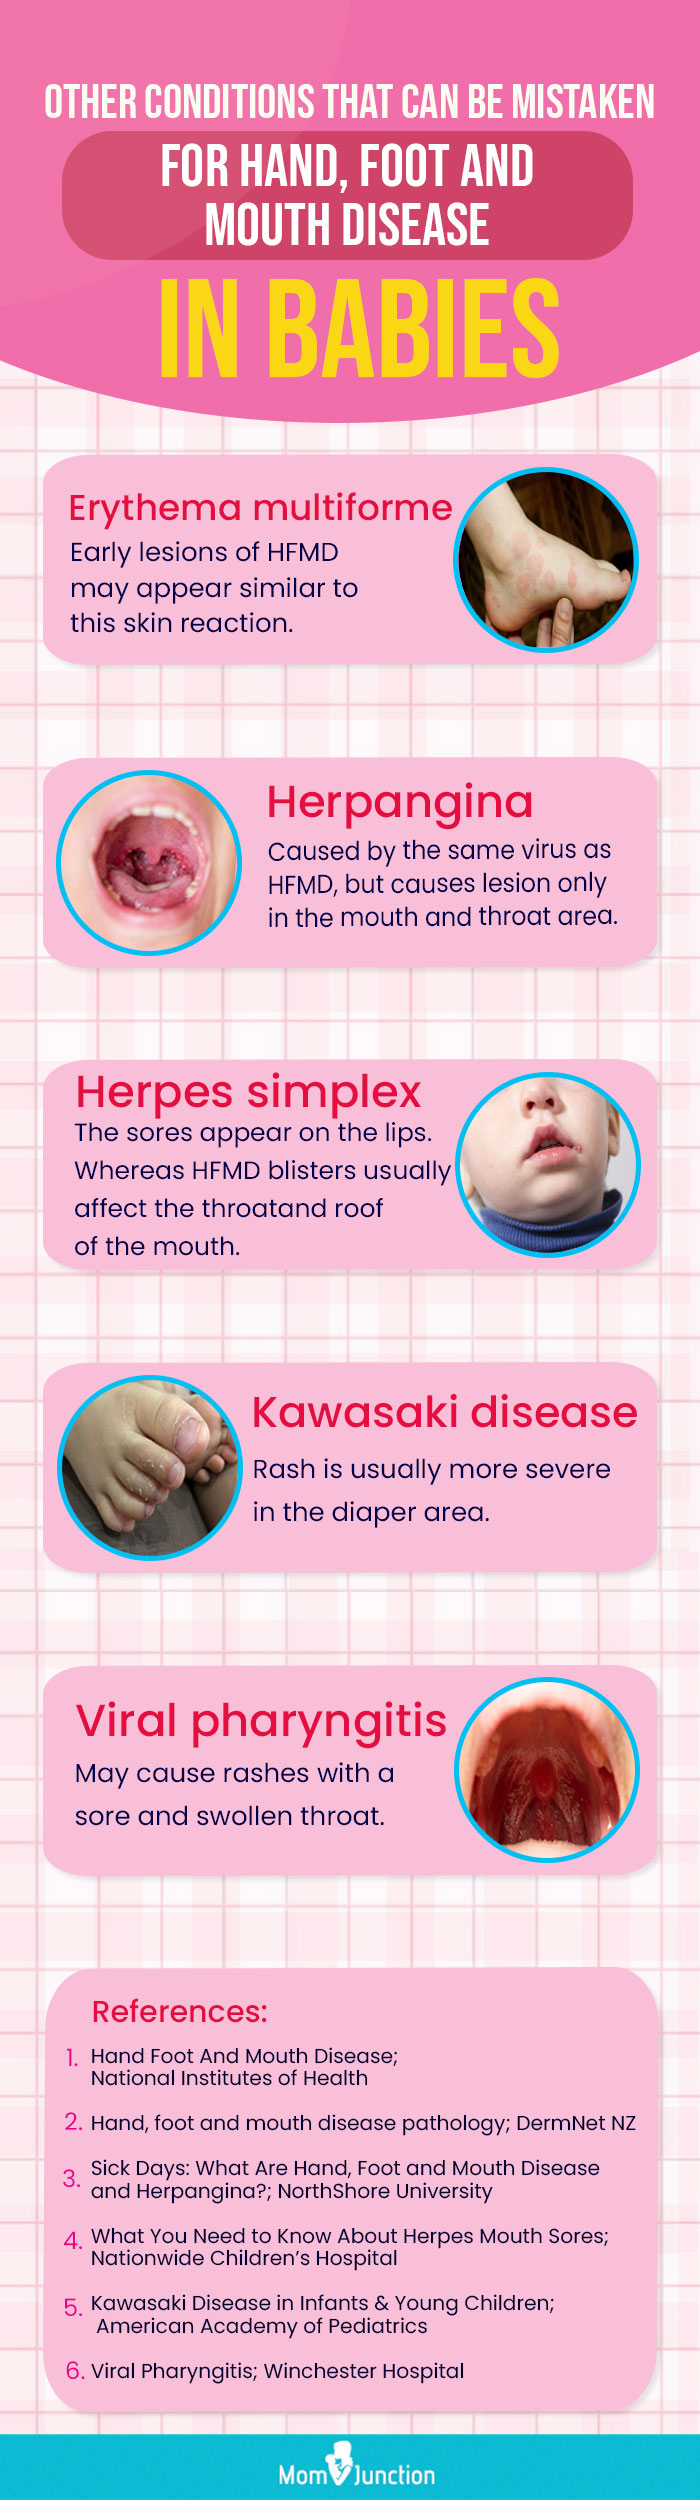 What is hand, foot and mouth disease?